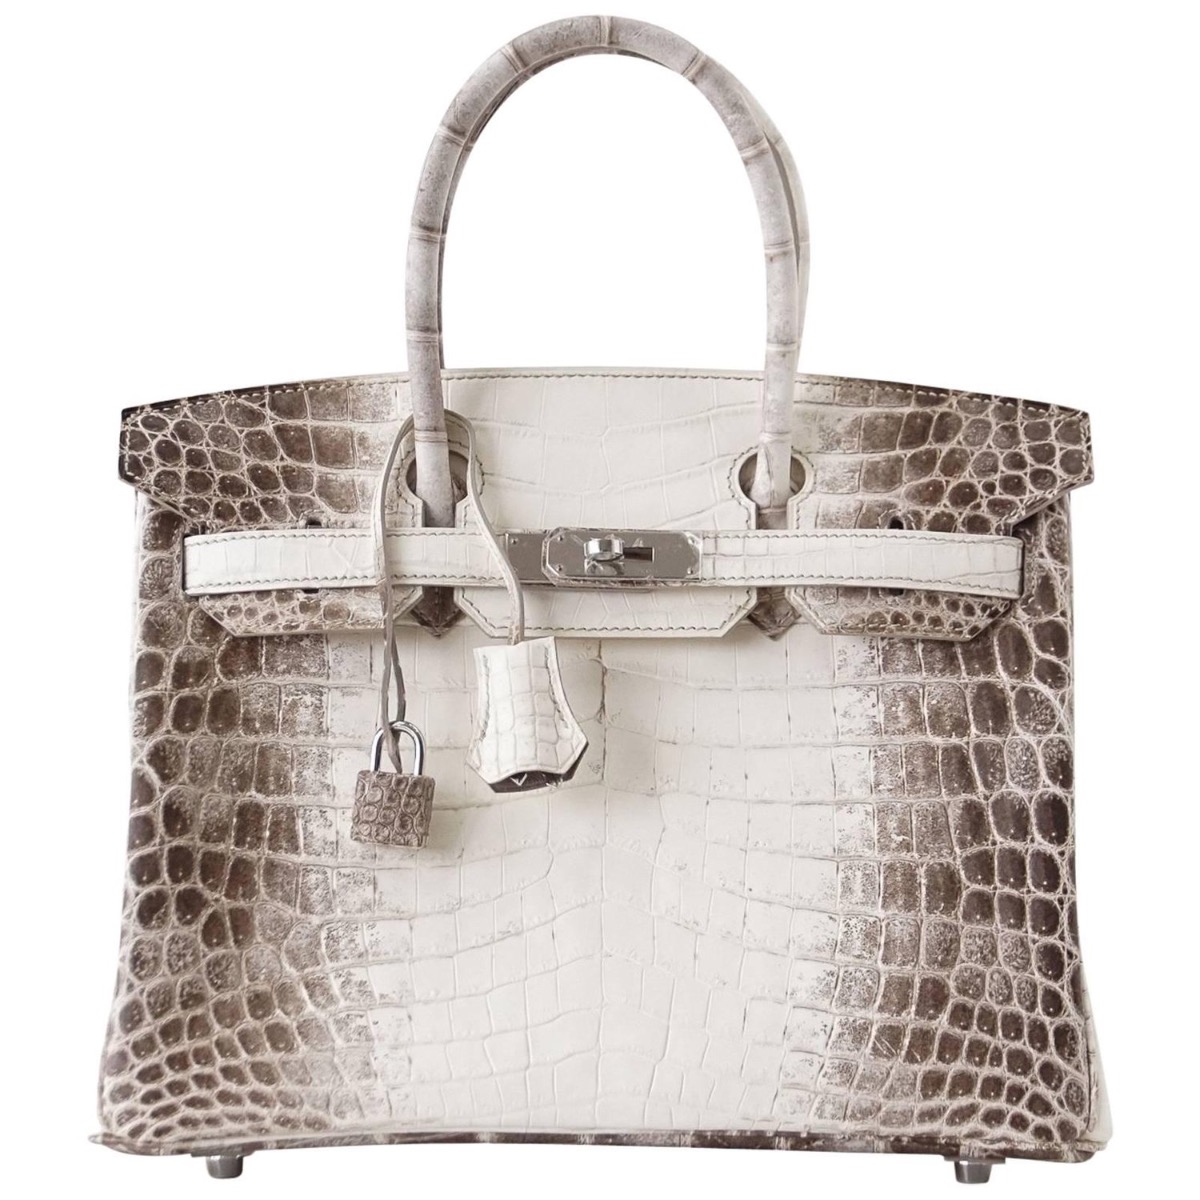 The Most Expensive Hermès Bags Online Are Sold Here